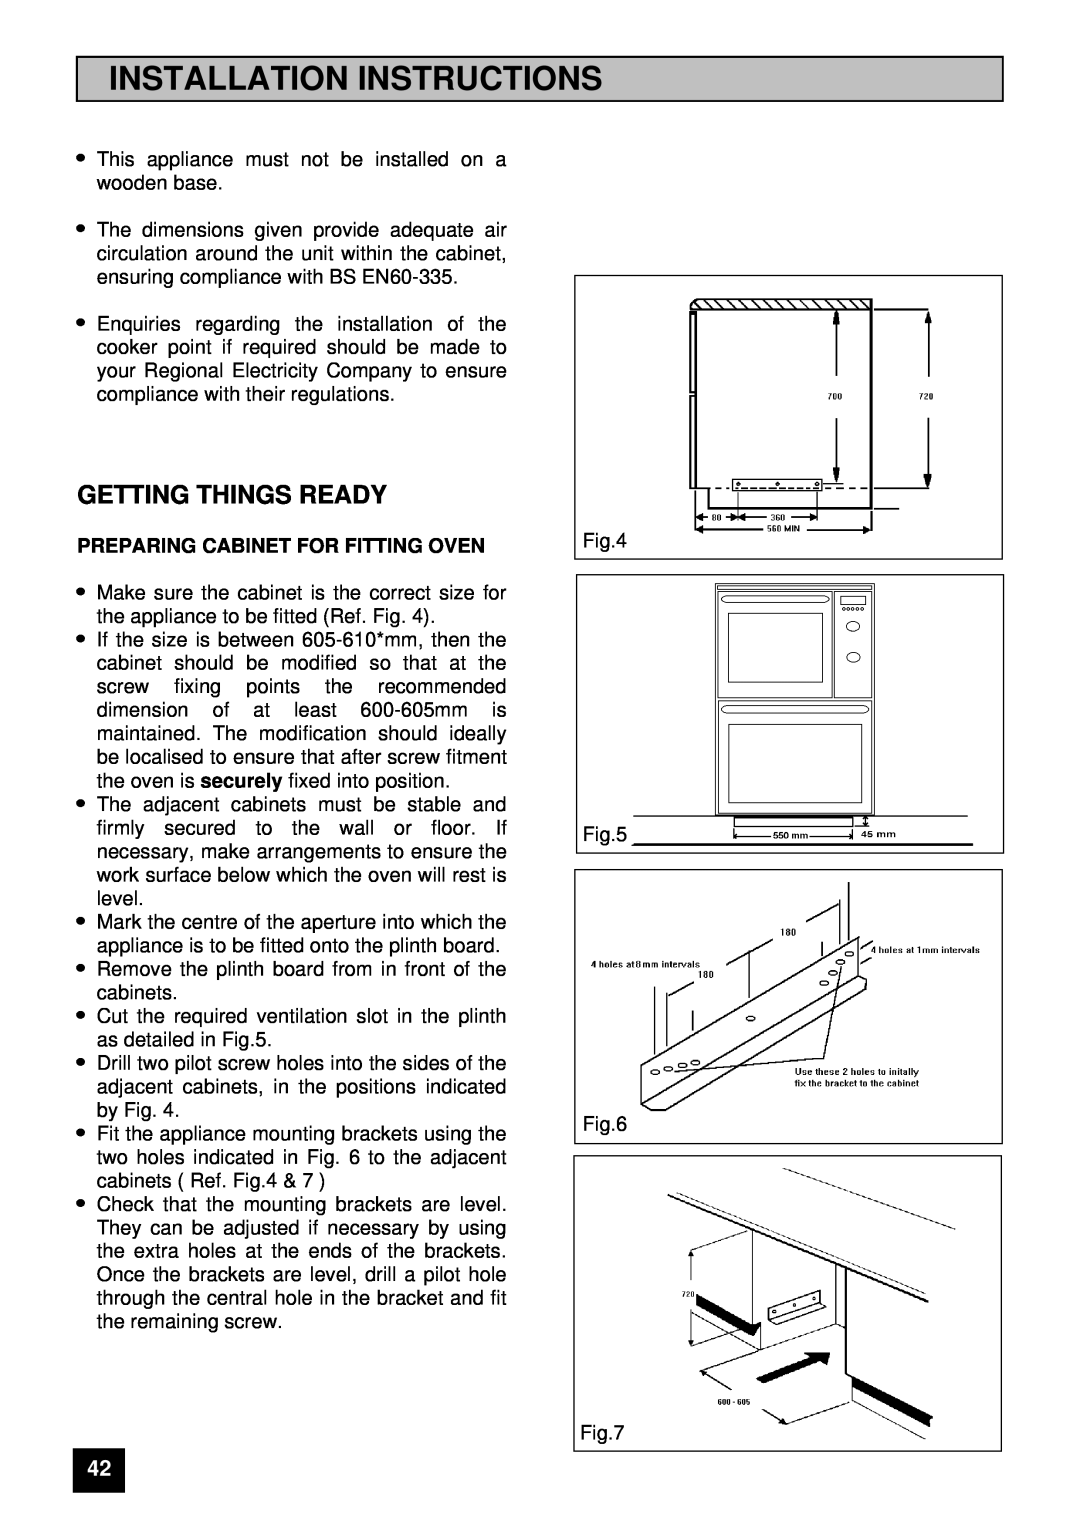 Zanussi ZUG 78 manual Getting Things Ready, Preparing Cabinet For Fitting Oven, Installation Instructions 